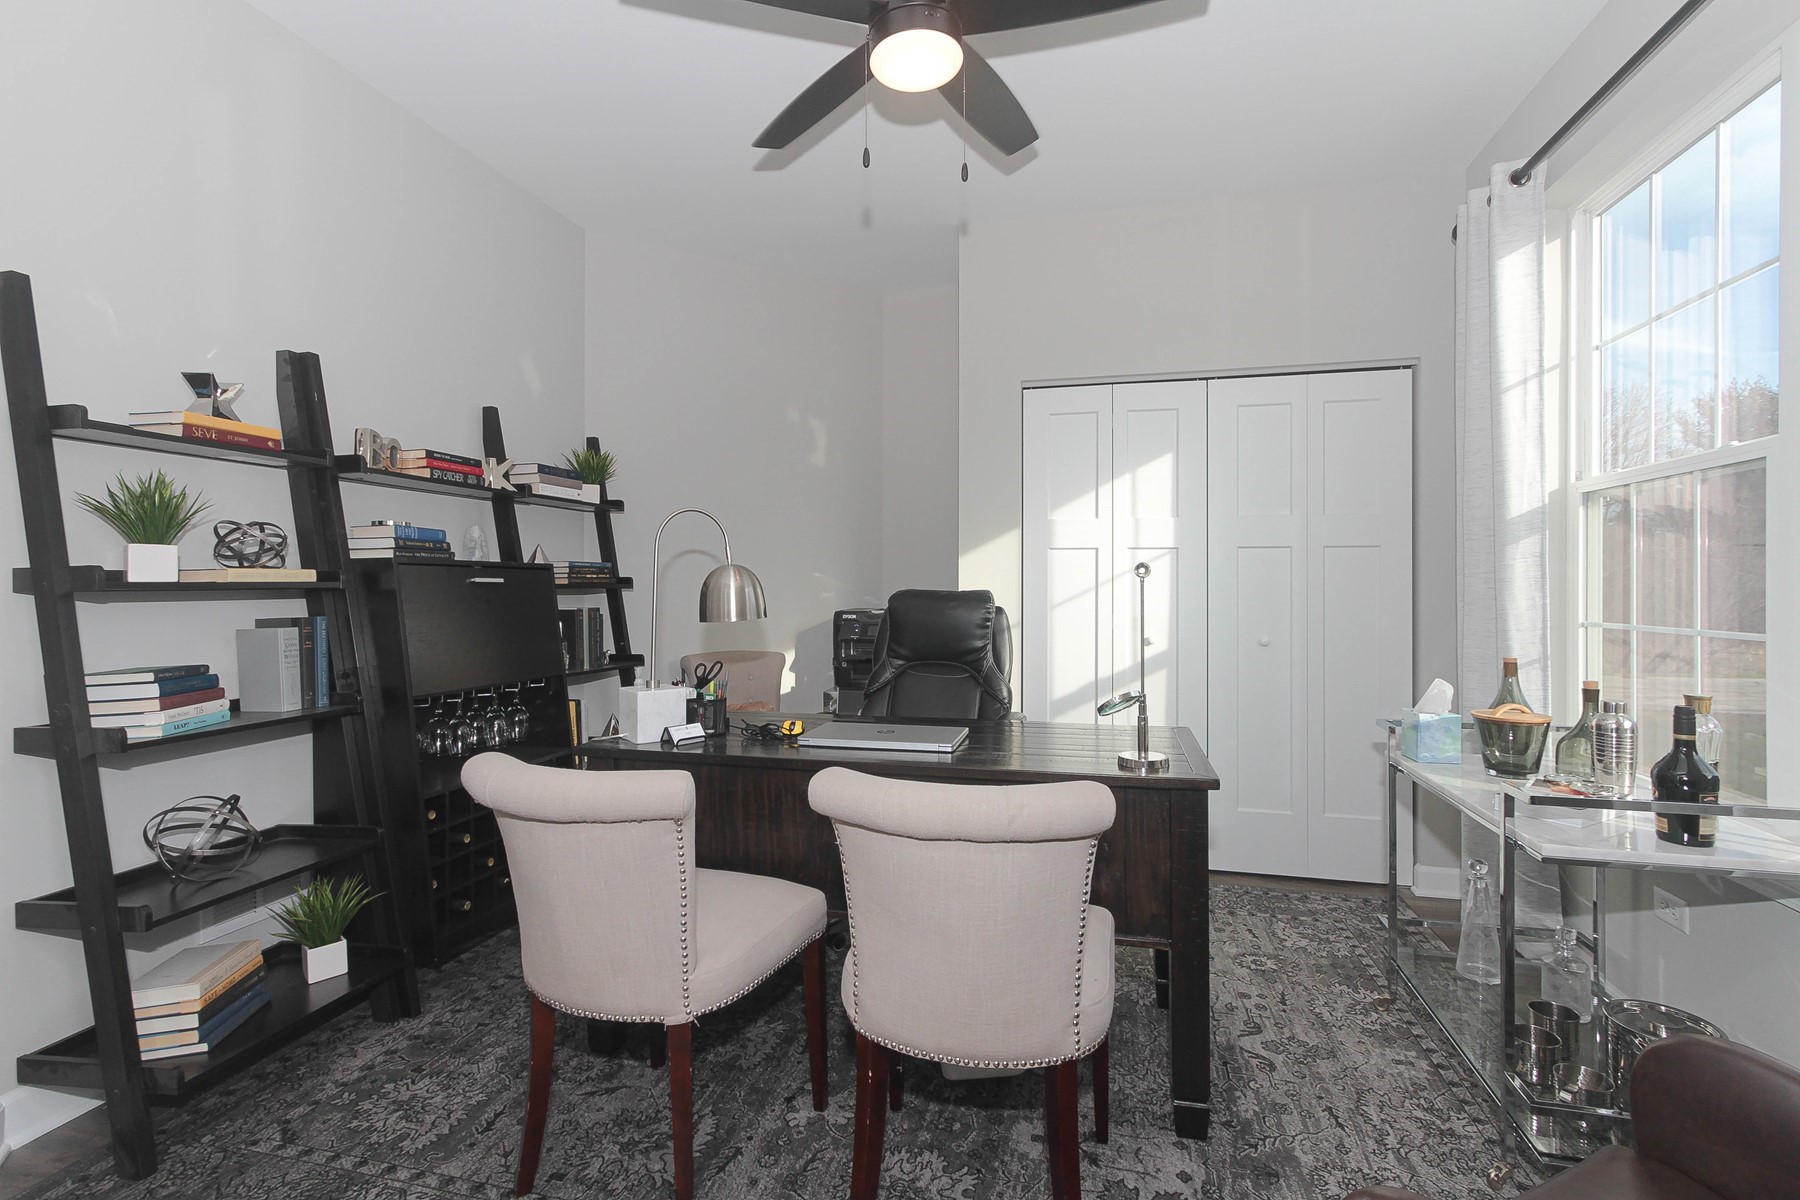 Converting a secondary bedroom into a den or home office is one of the many options Meritus Homes offers to allow buyers to personalize plans at The Villas at Madison Lane.